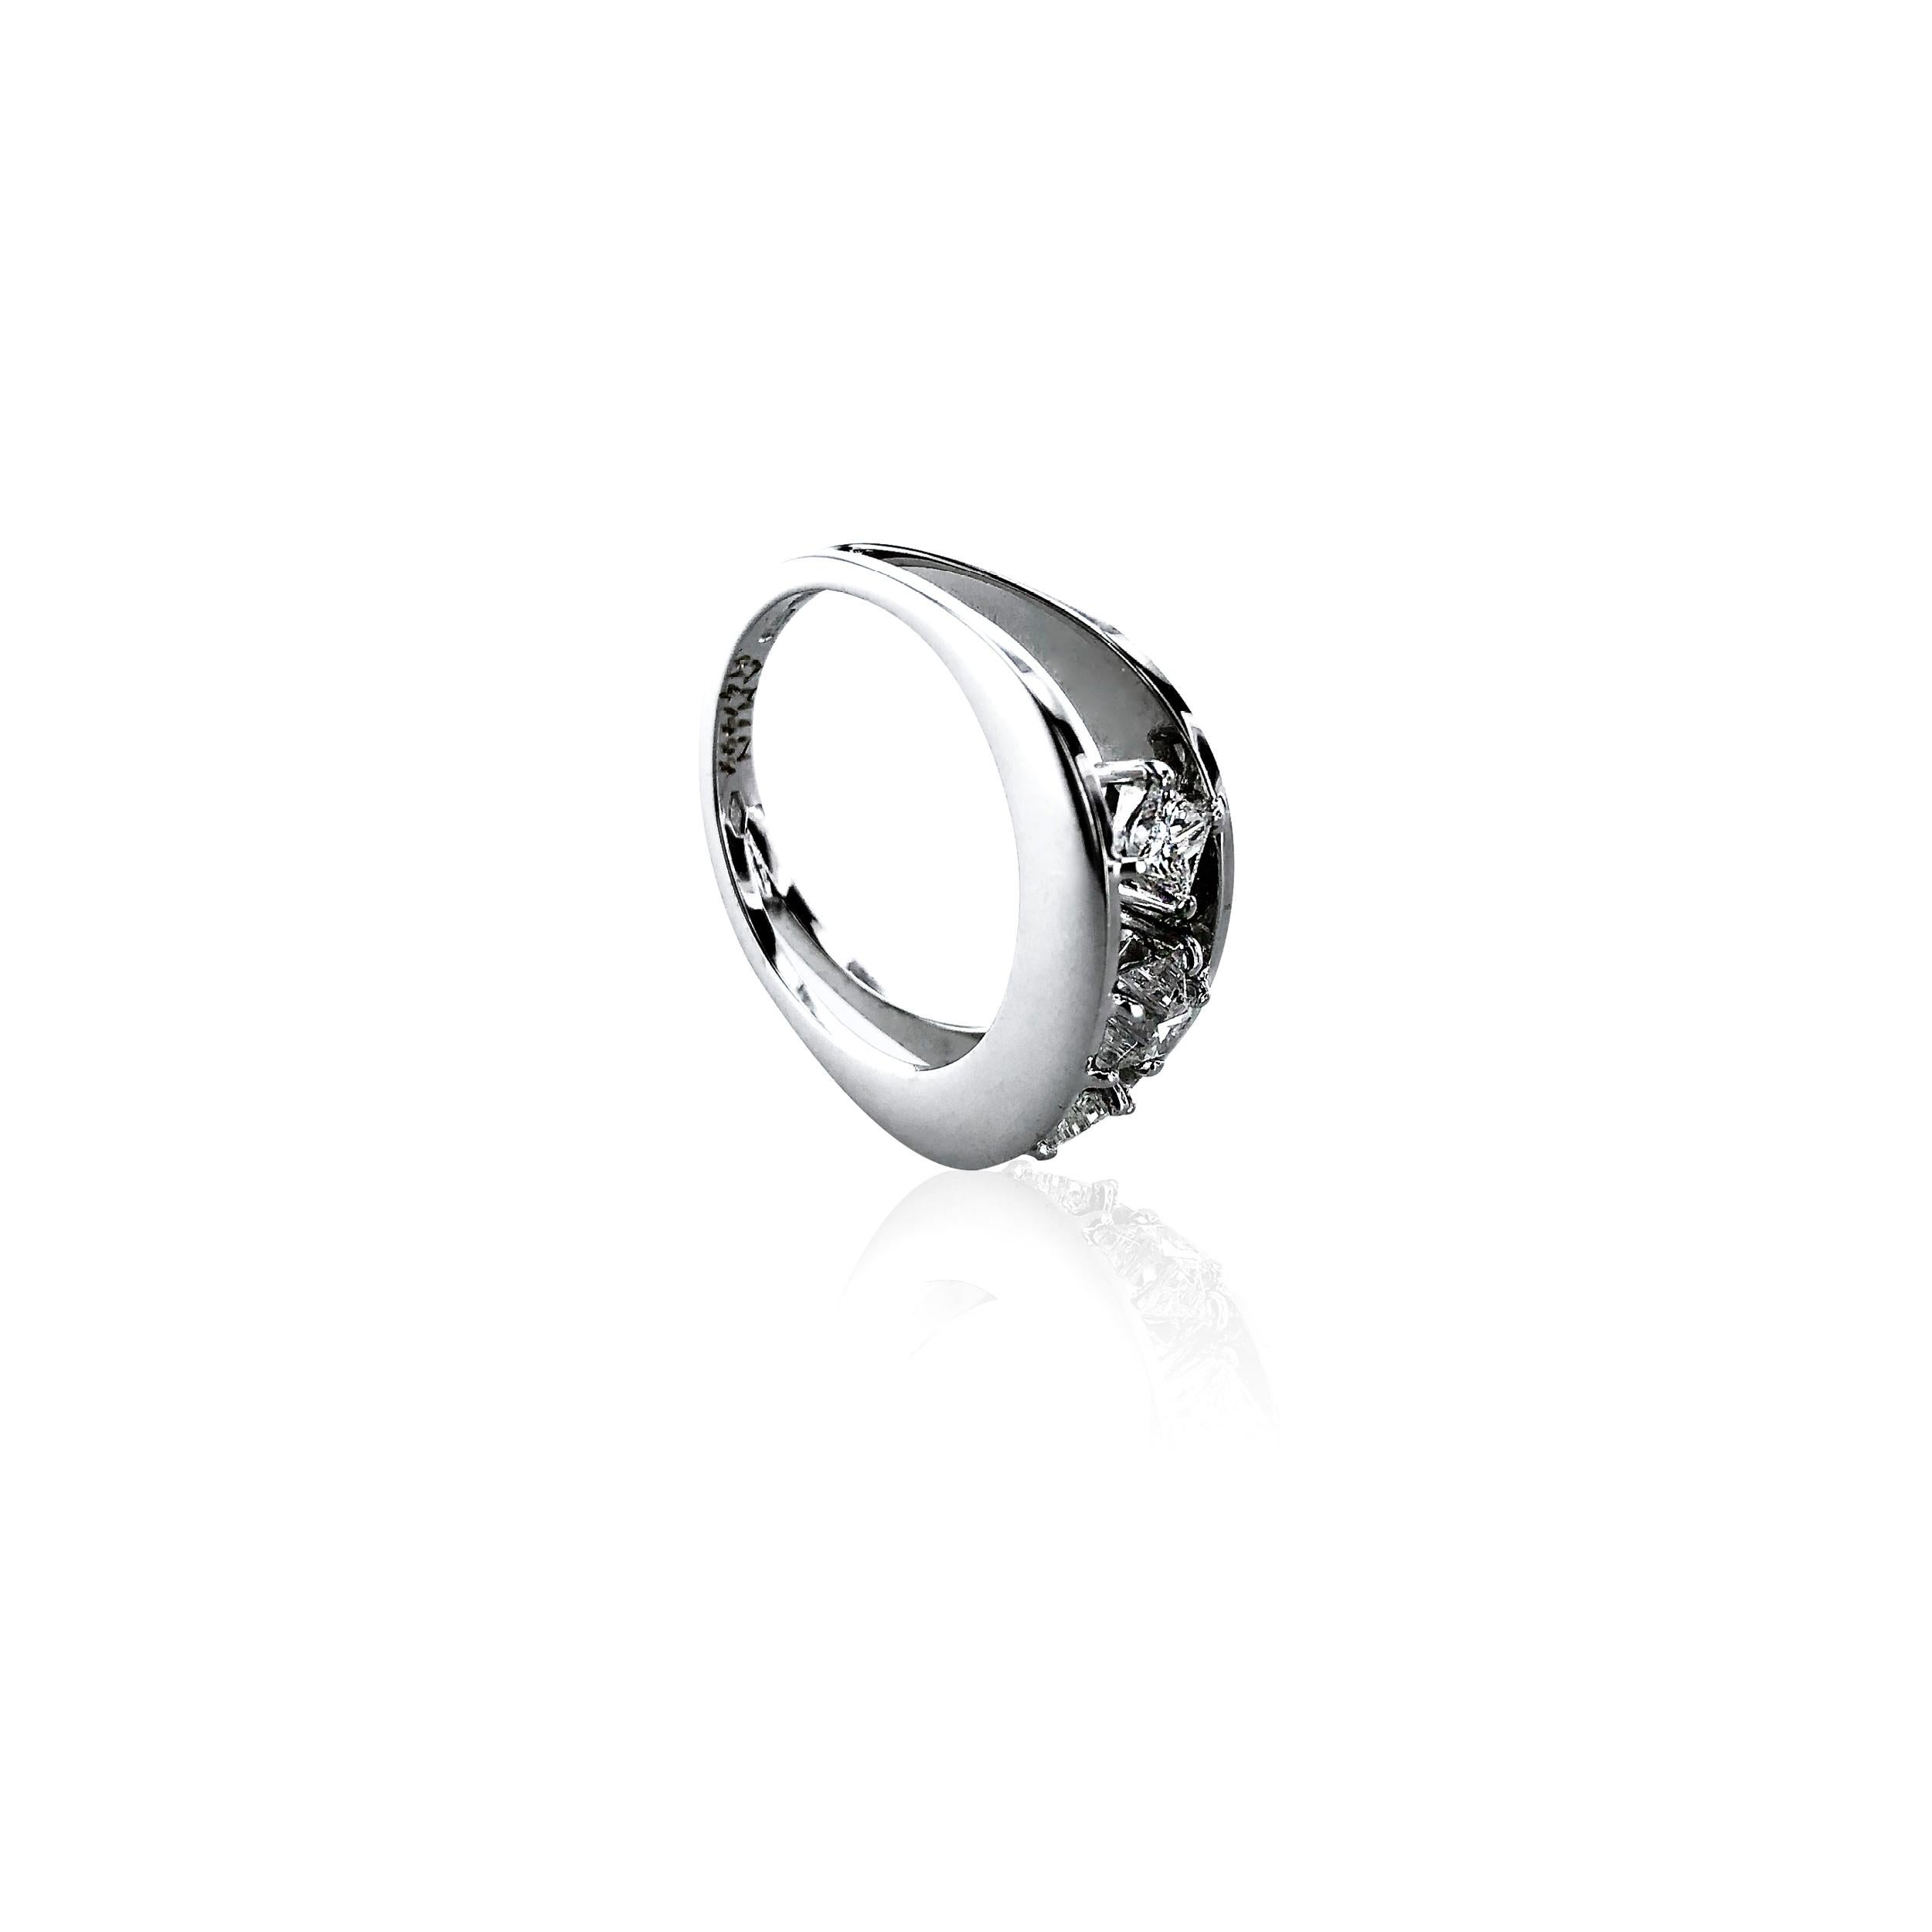 This 0.73 Carat Diamond 18Kt White Gold Trilogy Cocktail Ring is truly unique. 
Artistically designed with 3 diamond stars of equal size, set within 2 bands of white Gold, making a very stylish unisex ring.  

Produced, designed and certified in